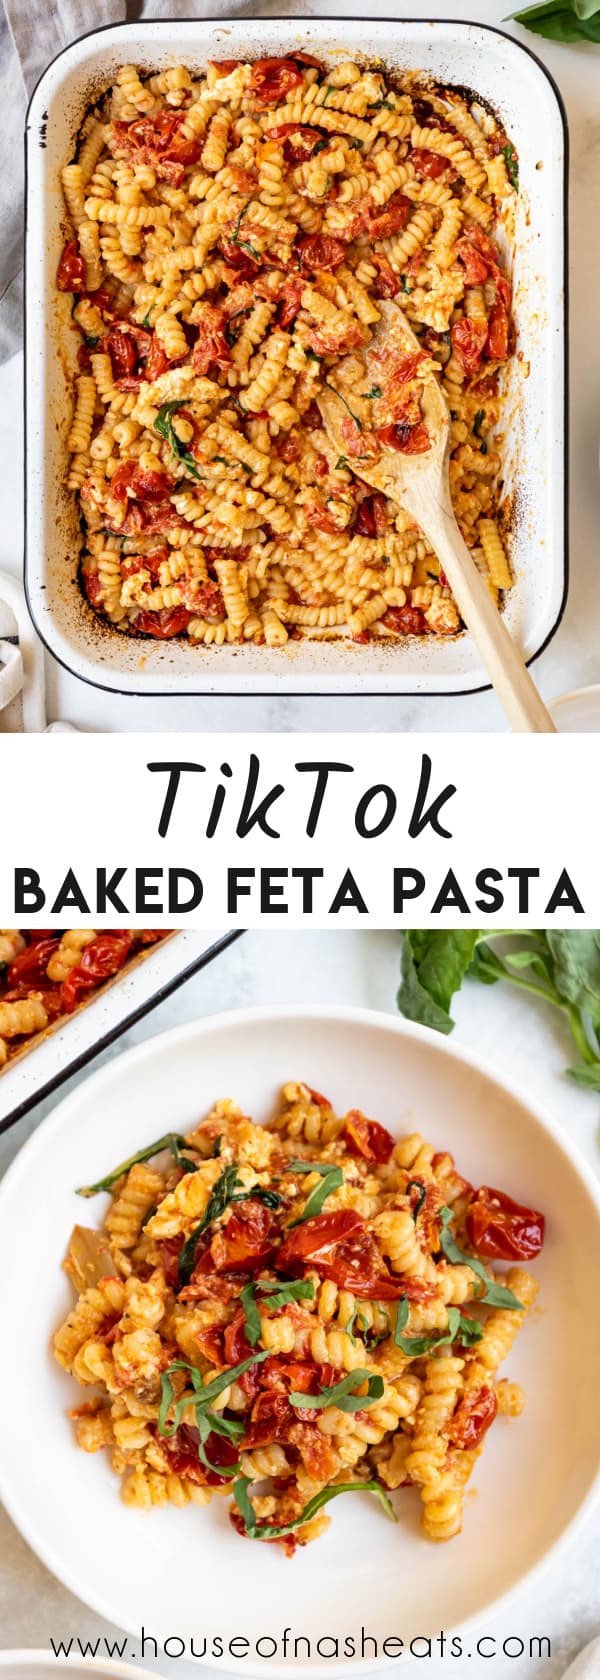 A collage of images of the tiktok viral baked feta pasta with text overlay.